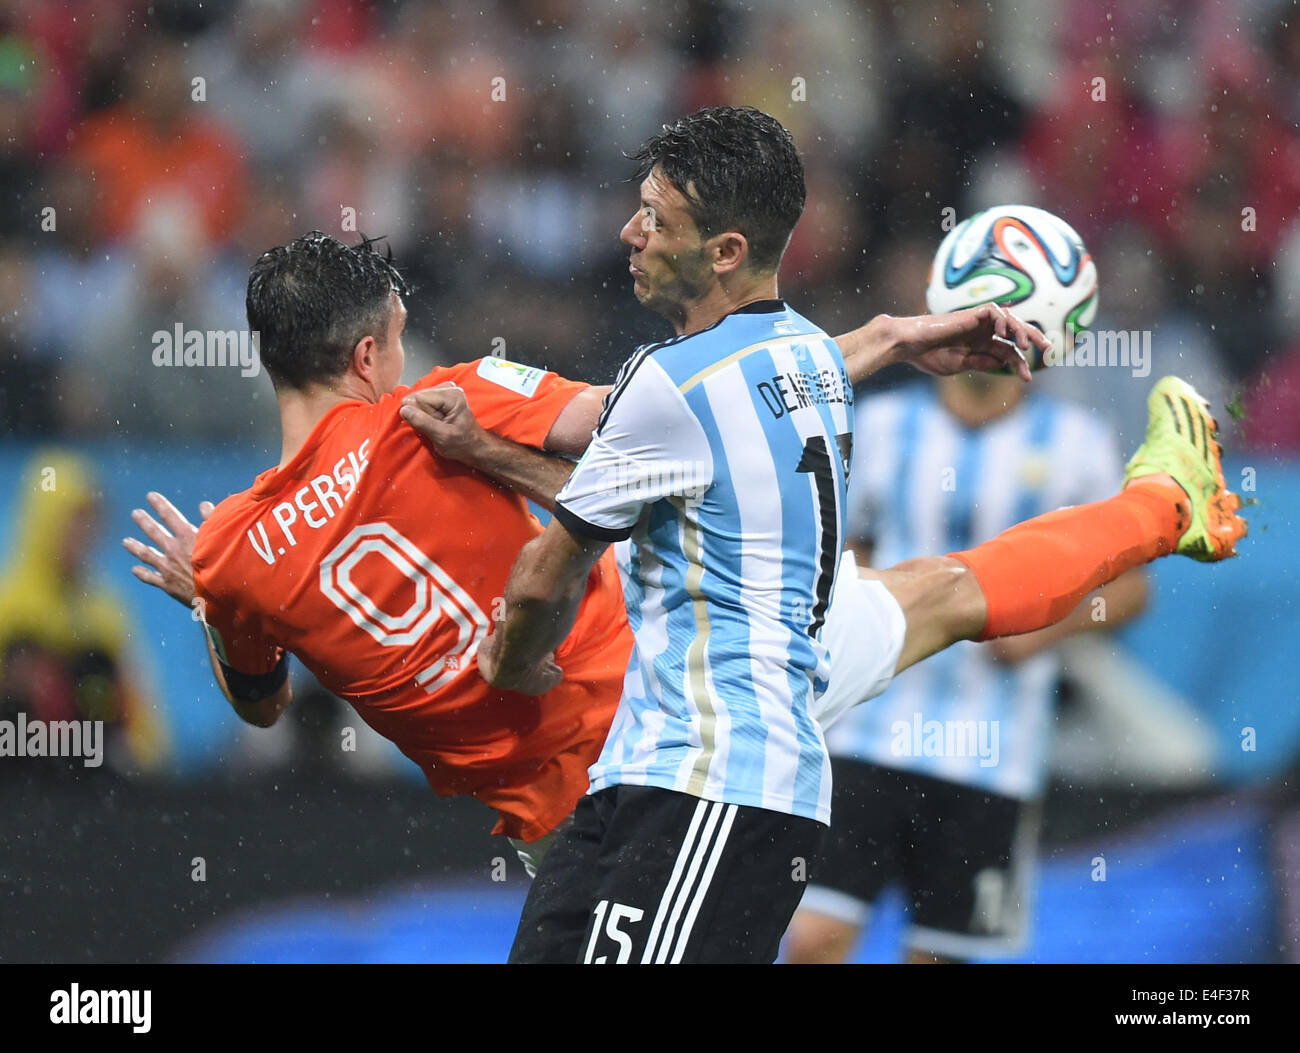 Sao Paulo, Brazil. 09th July, 2014. Martin Demichelis (R) of Argentina and Robin van Persie of the Netherlands vie for the ball during the FIFA World Cup 2014 semi-final soccer match between the Netherlands and Argentina at the Arena Corinthians in Sao Paulo, Brazil, 09 July 2014. Photo: Marius Becker/dpa/Alamy Live News Stock Photo